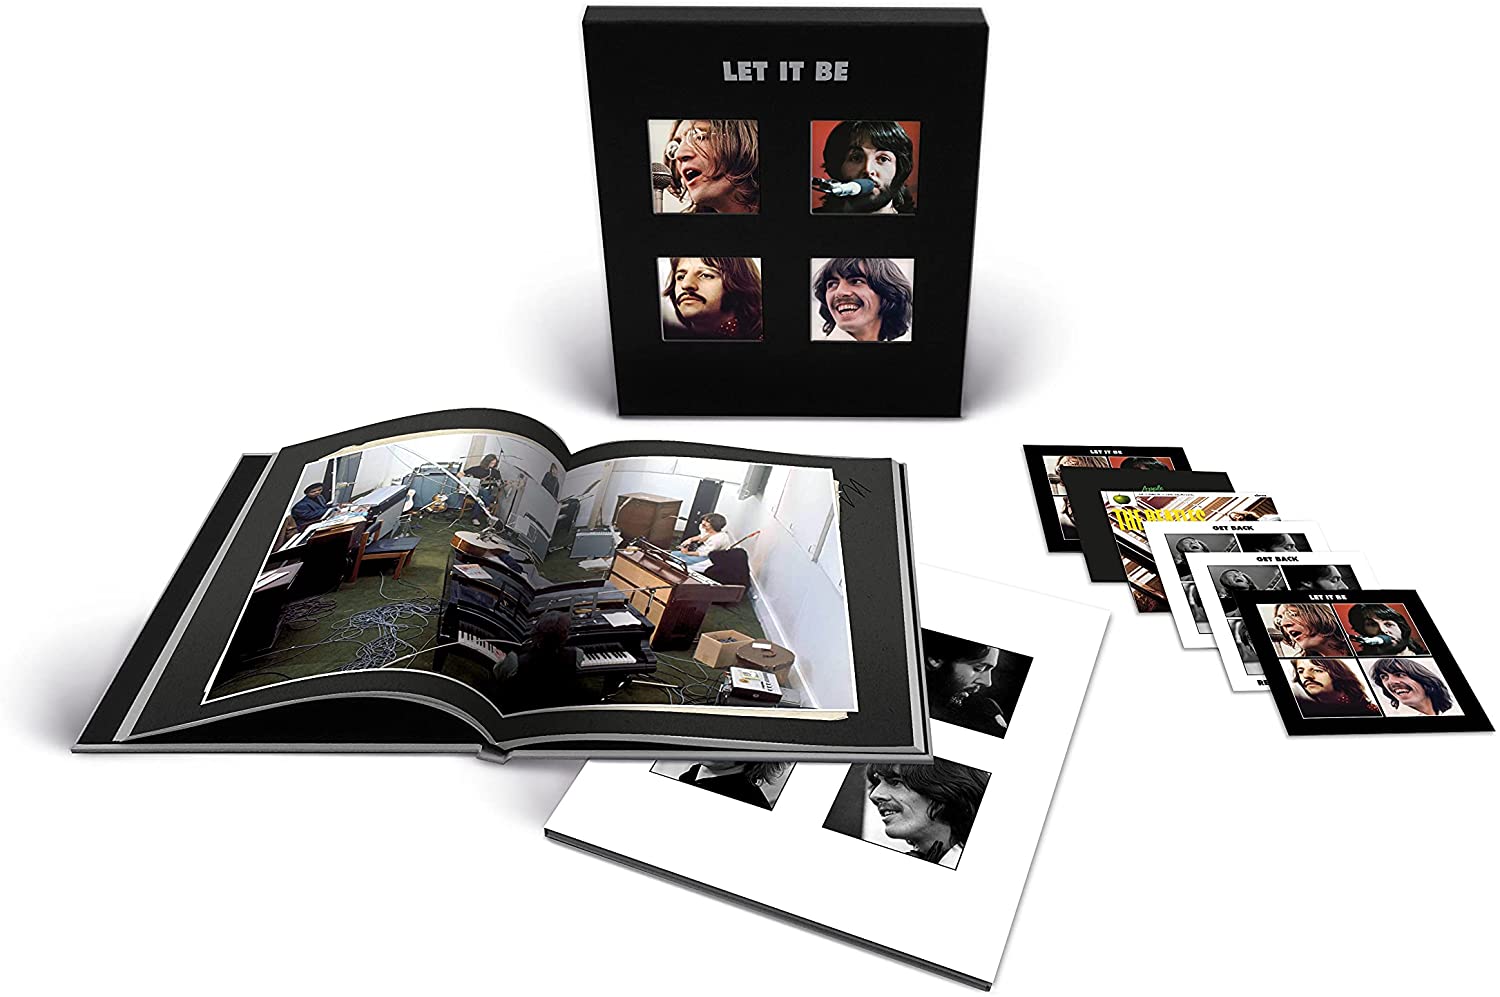 BEATLES - Let It Be - 50Th Anniversary limited superdeluxe box set